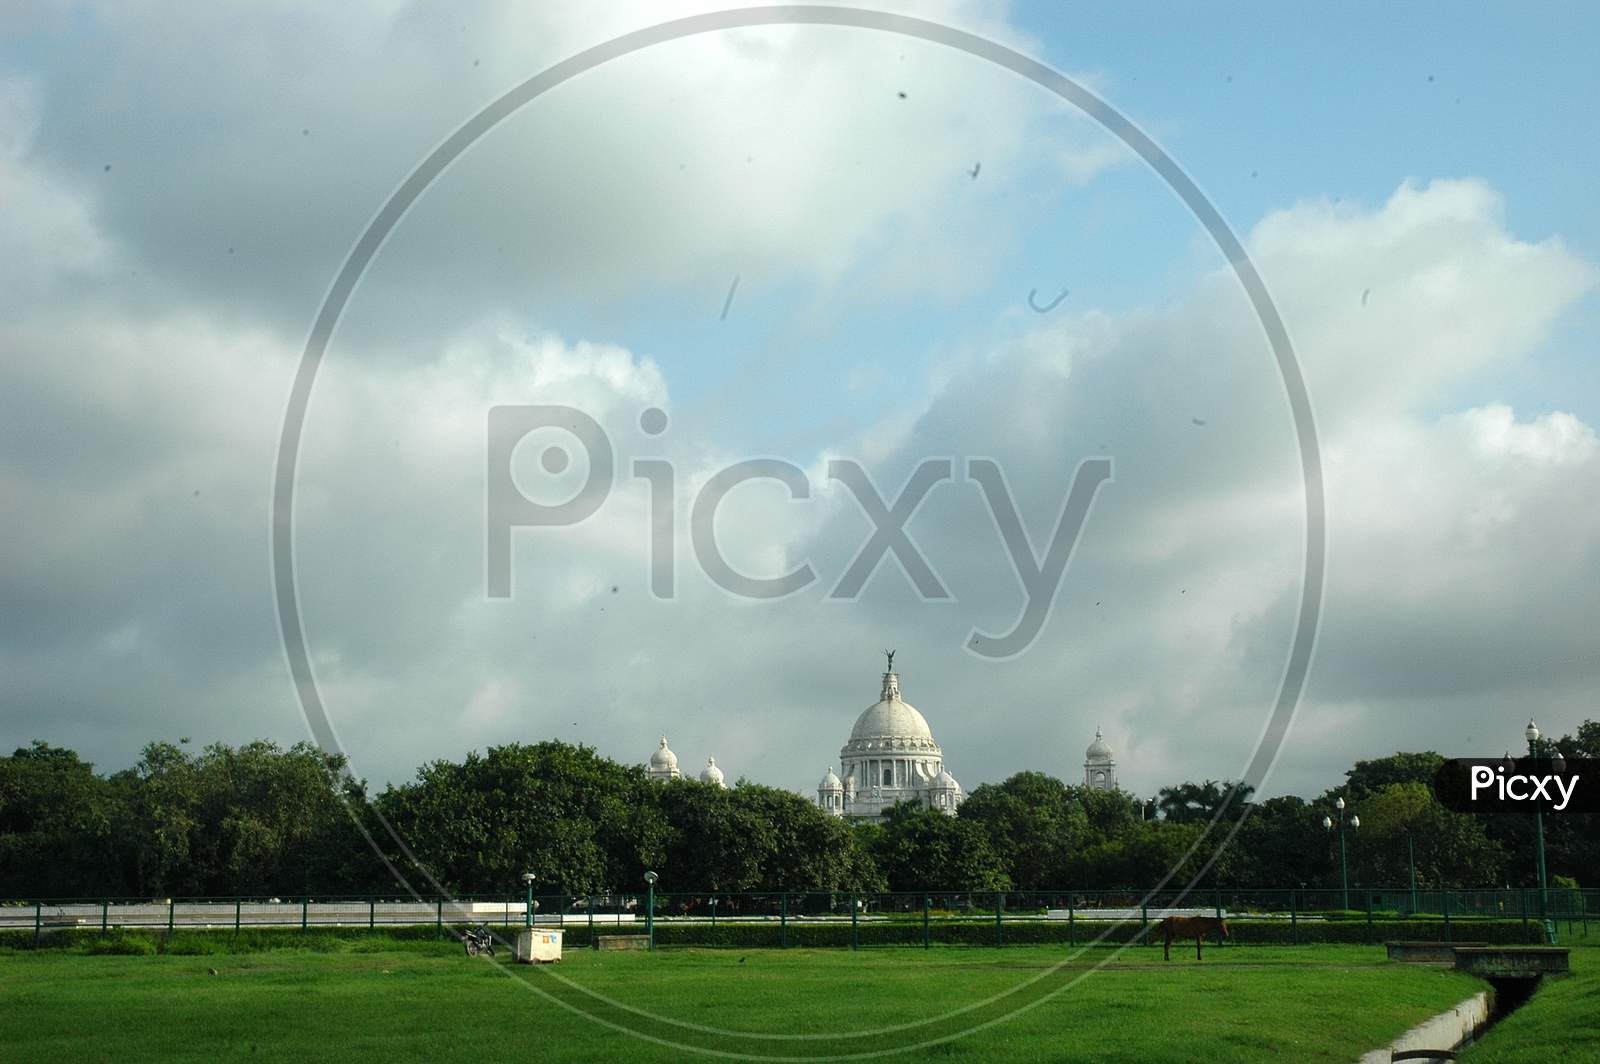 Image Of Horse Grazing On Lawn Garden With Victoria Palace In Images, Photos, Reviews